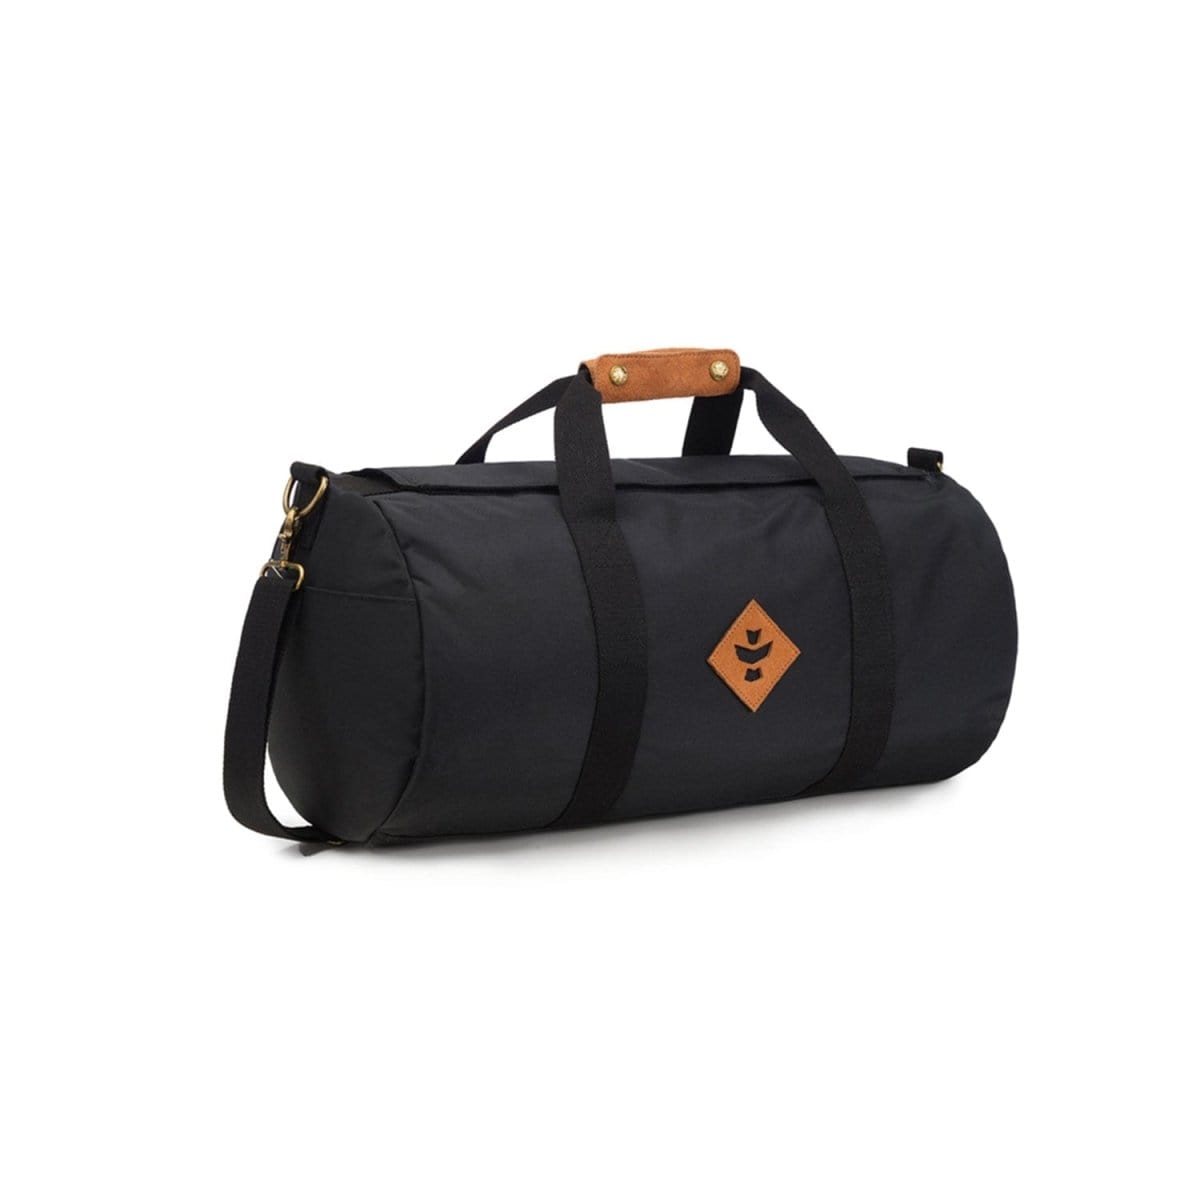 Revelry Supply Travel Bag Black The Overnighter - Smell Proof Small Duffle